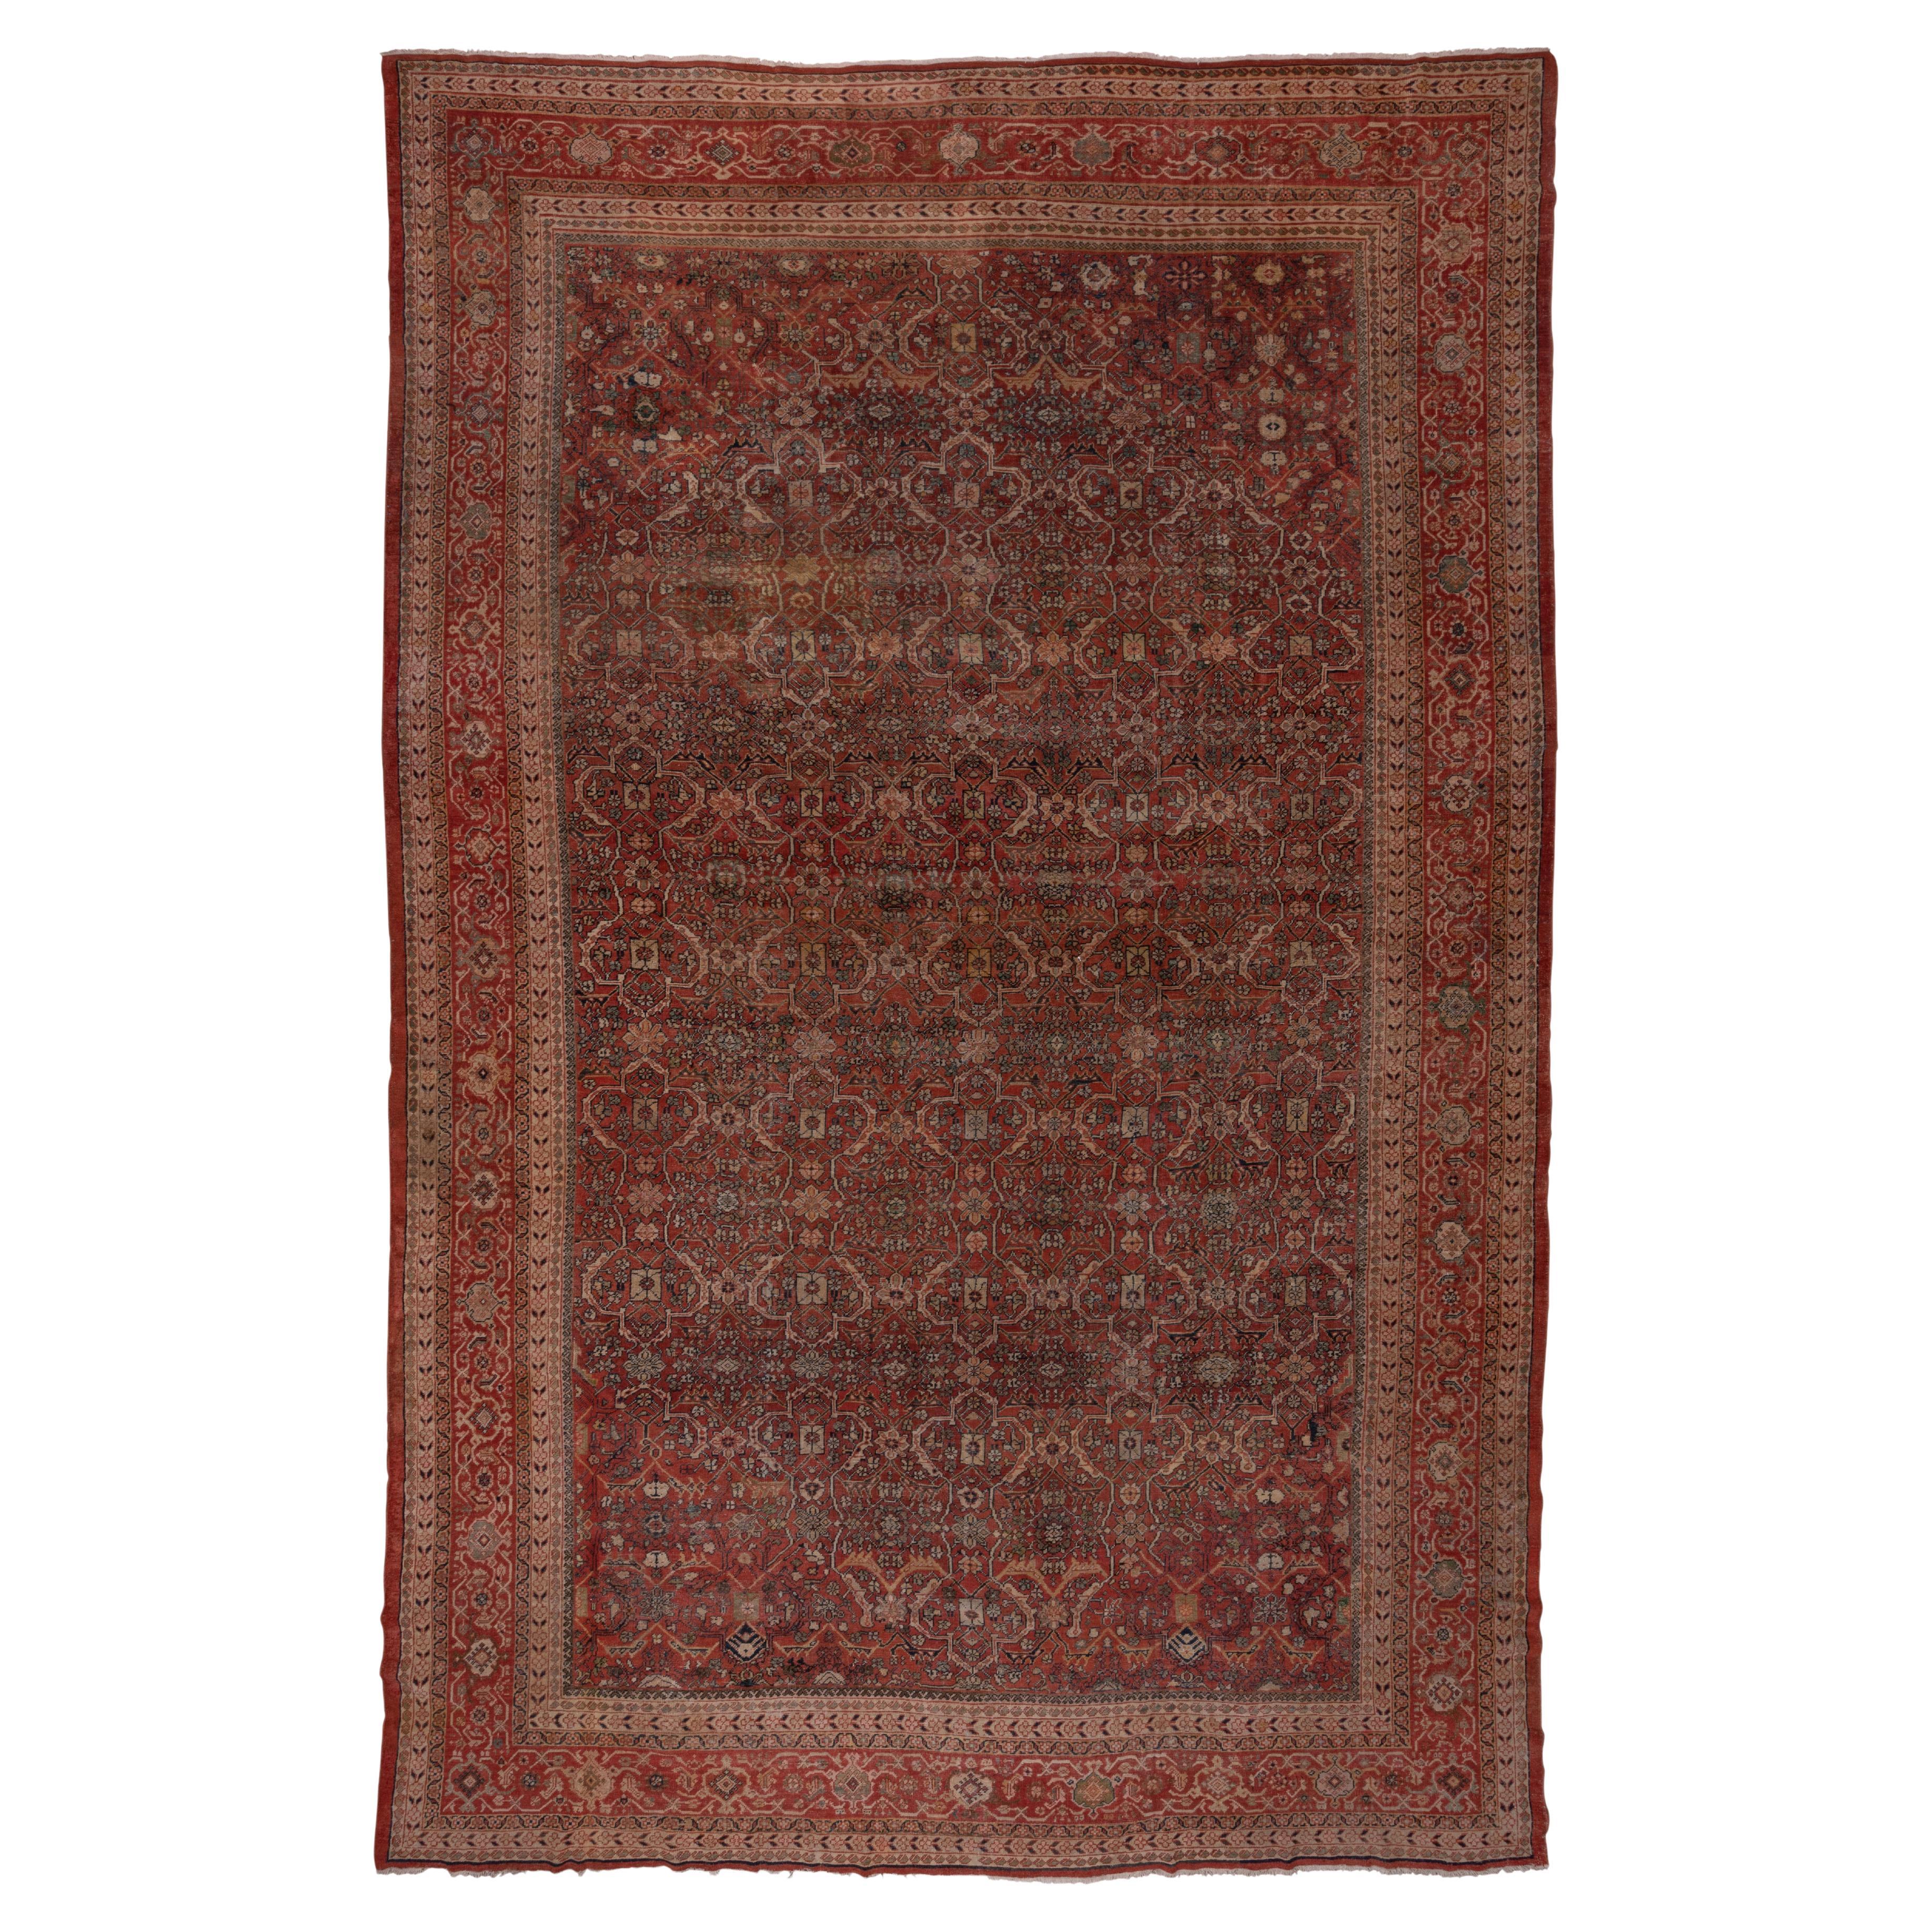 Stunning Antique Persian Sultanabad Large Carpet